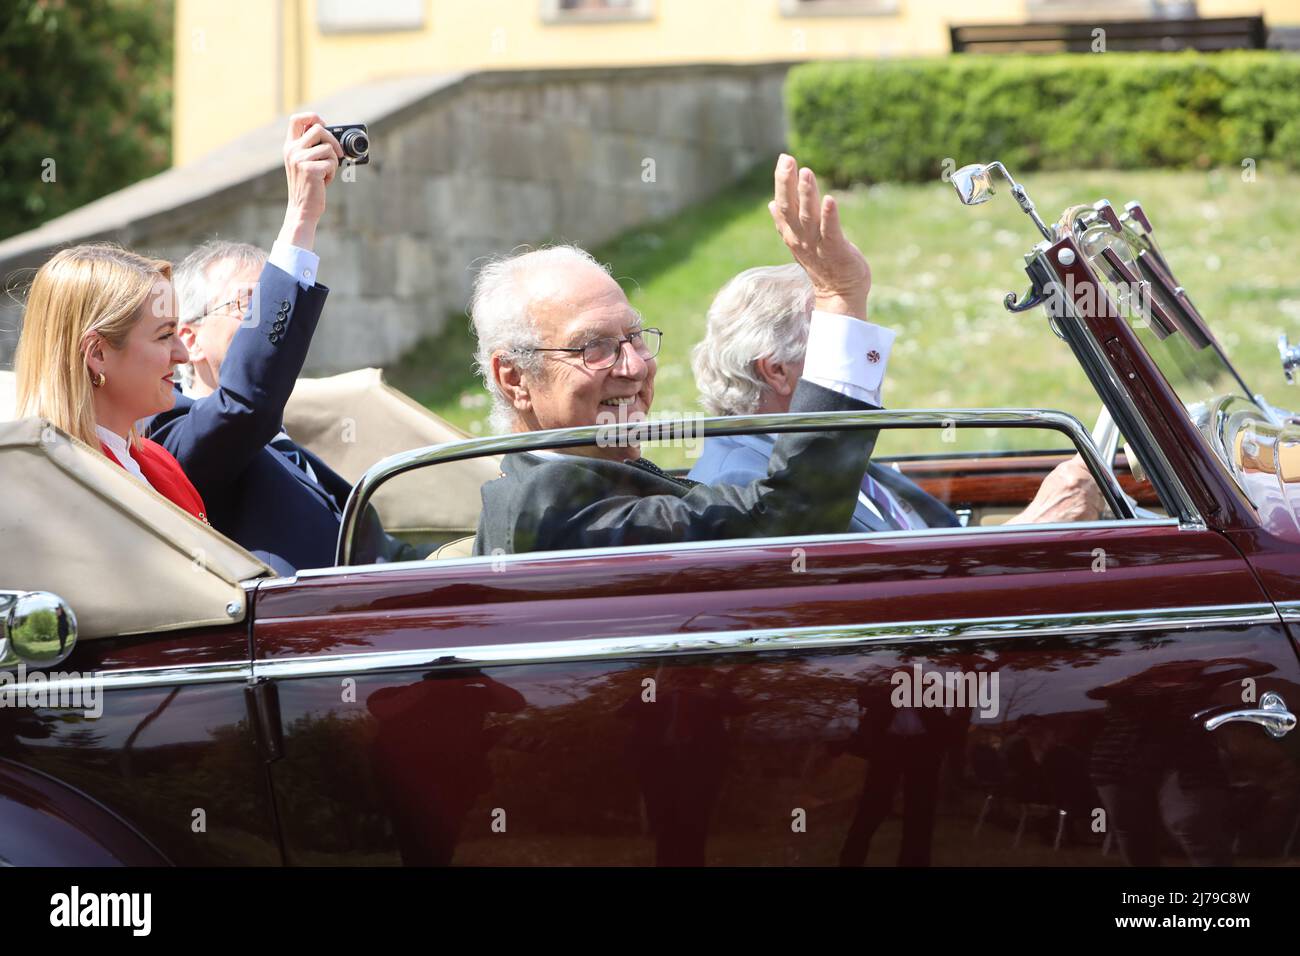 07 May 2022, Saxony-Anhalt, Ballenstedt: Eduard Prince von Anhalt waves from a vehicle. He is celebrating his 80th birthday in Ballenstedt. At the same time the investiture took place. In the context of the Investitur, persons are honored annually for special achievements by the Askan House Order 'Albrecht the Bear'. The investiture takes place in the presence of Eduard Prince of Anhalt. Photo: Matthias Bein/dpa-Zentralbild/ZB Stock Photo